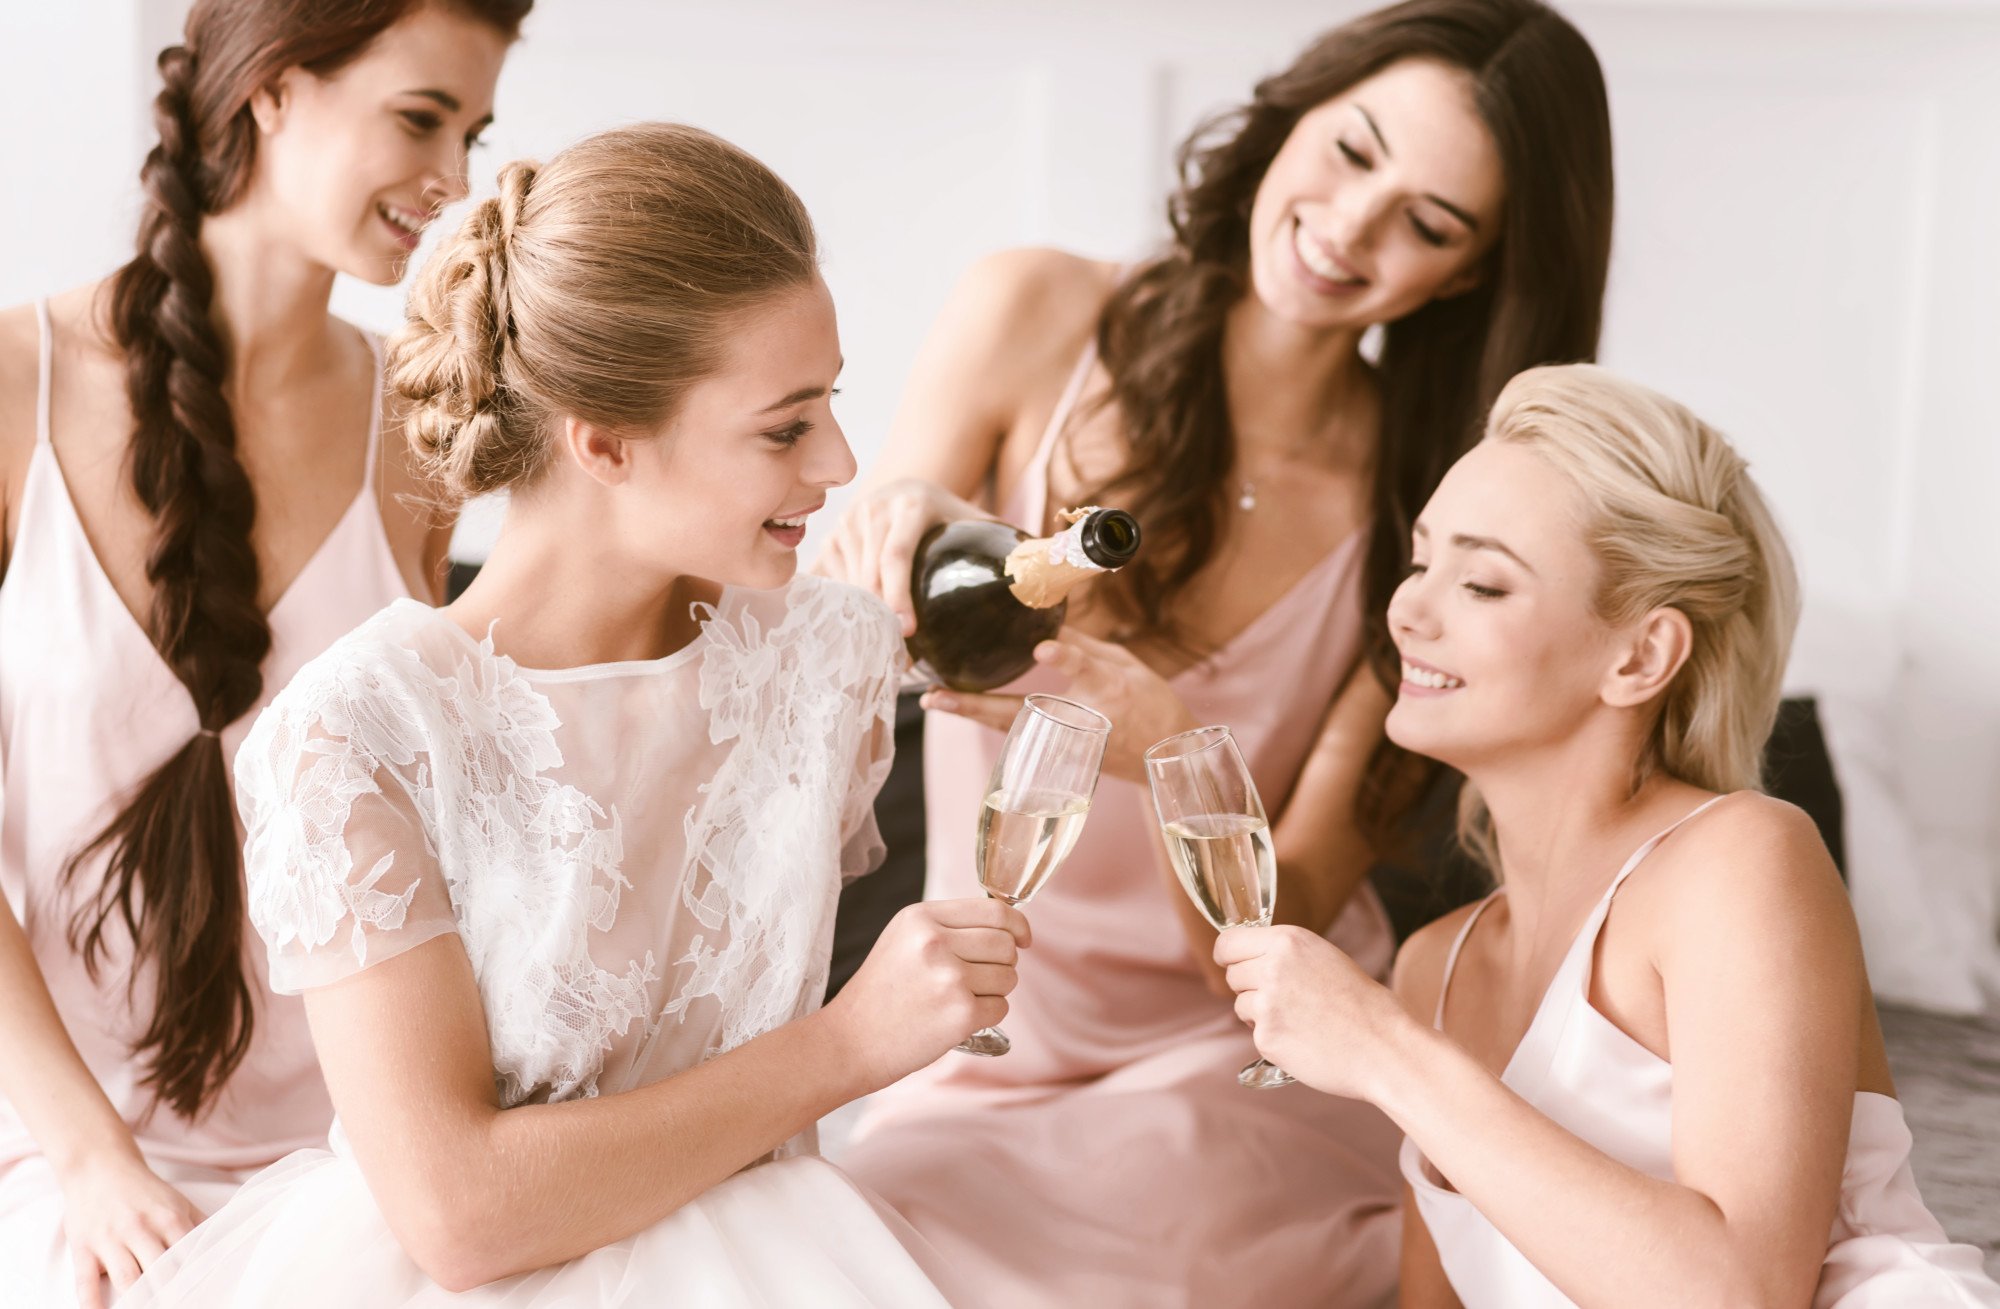 Are you looking for cute hairstyles for yourself or your bridesmaids? Check out these 5 easy bridesmaid hairstyles for some inspiration.